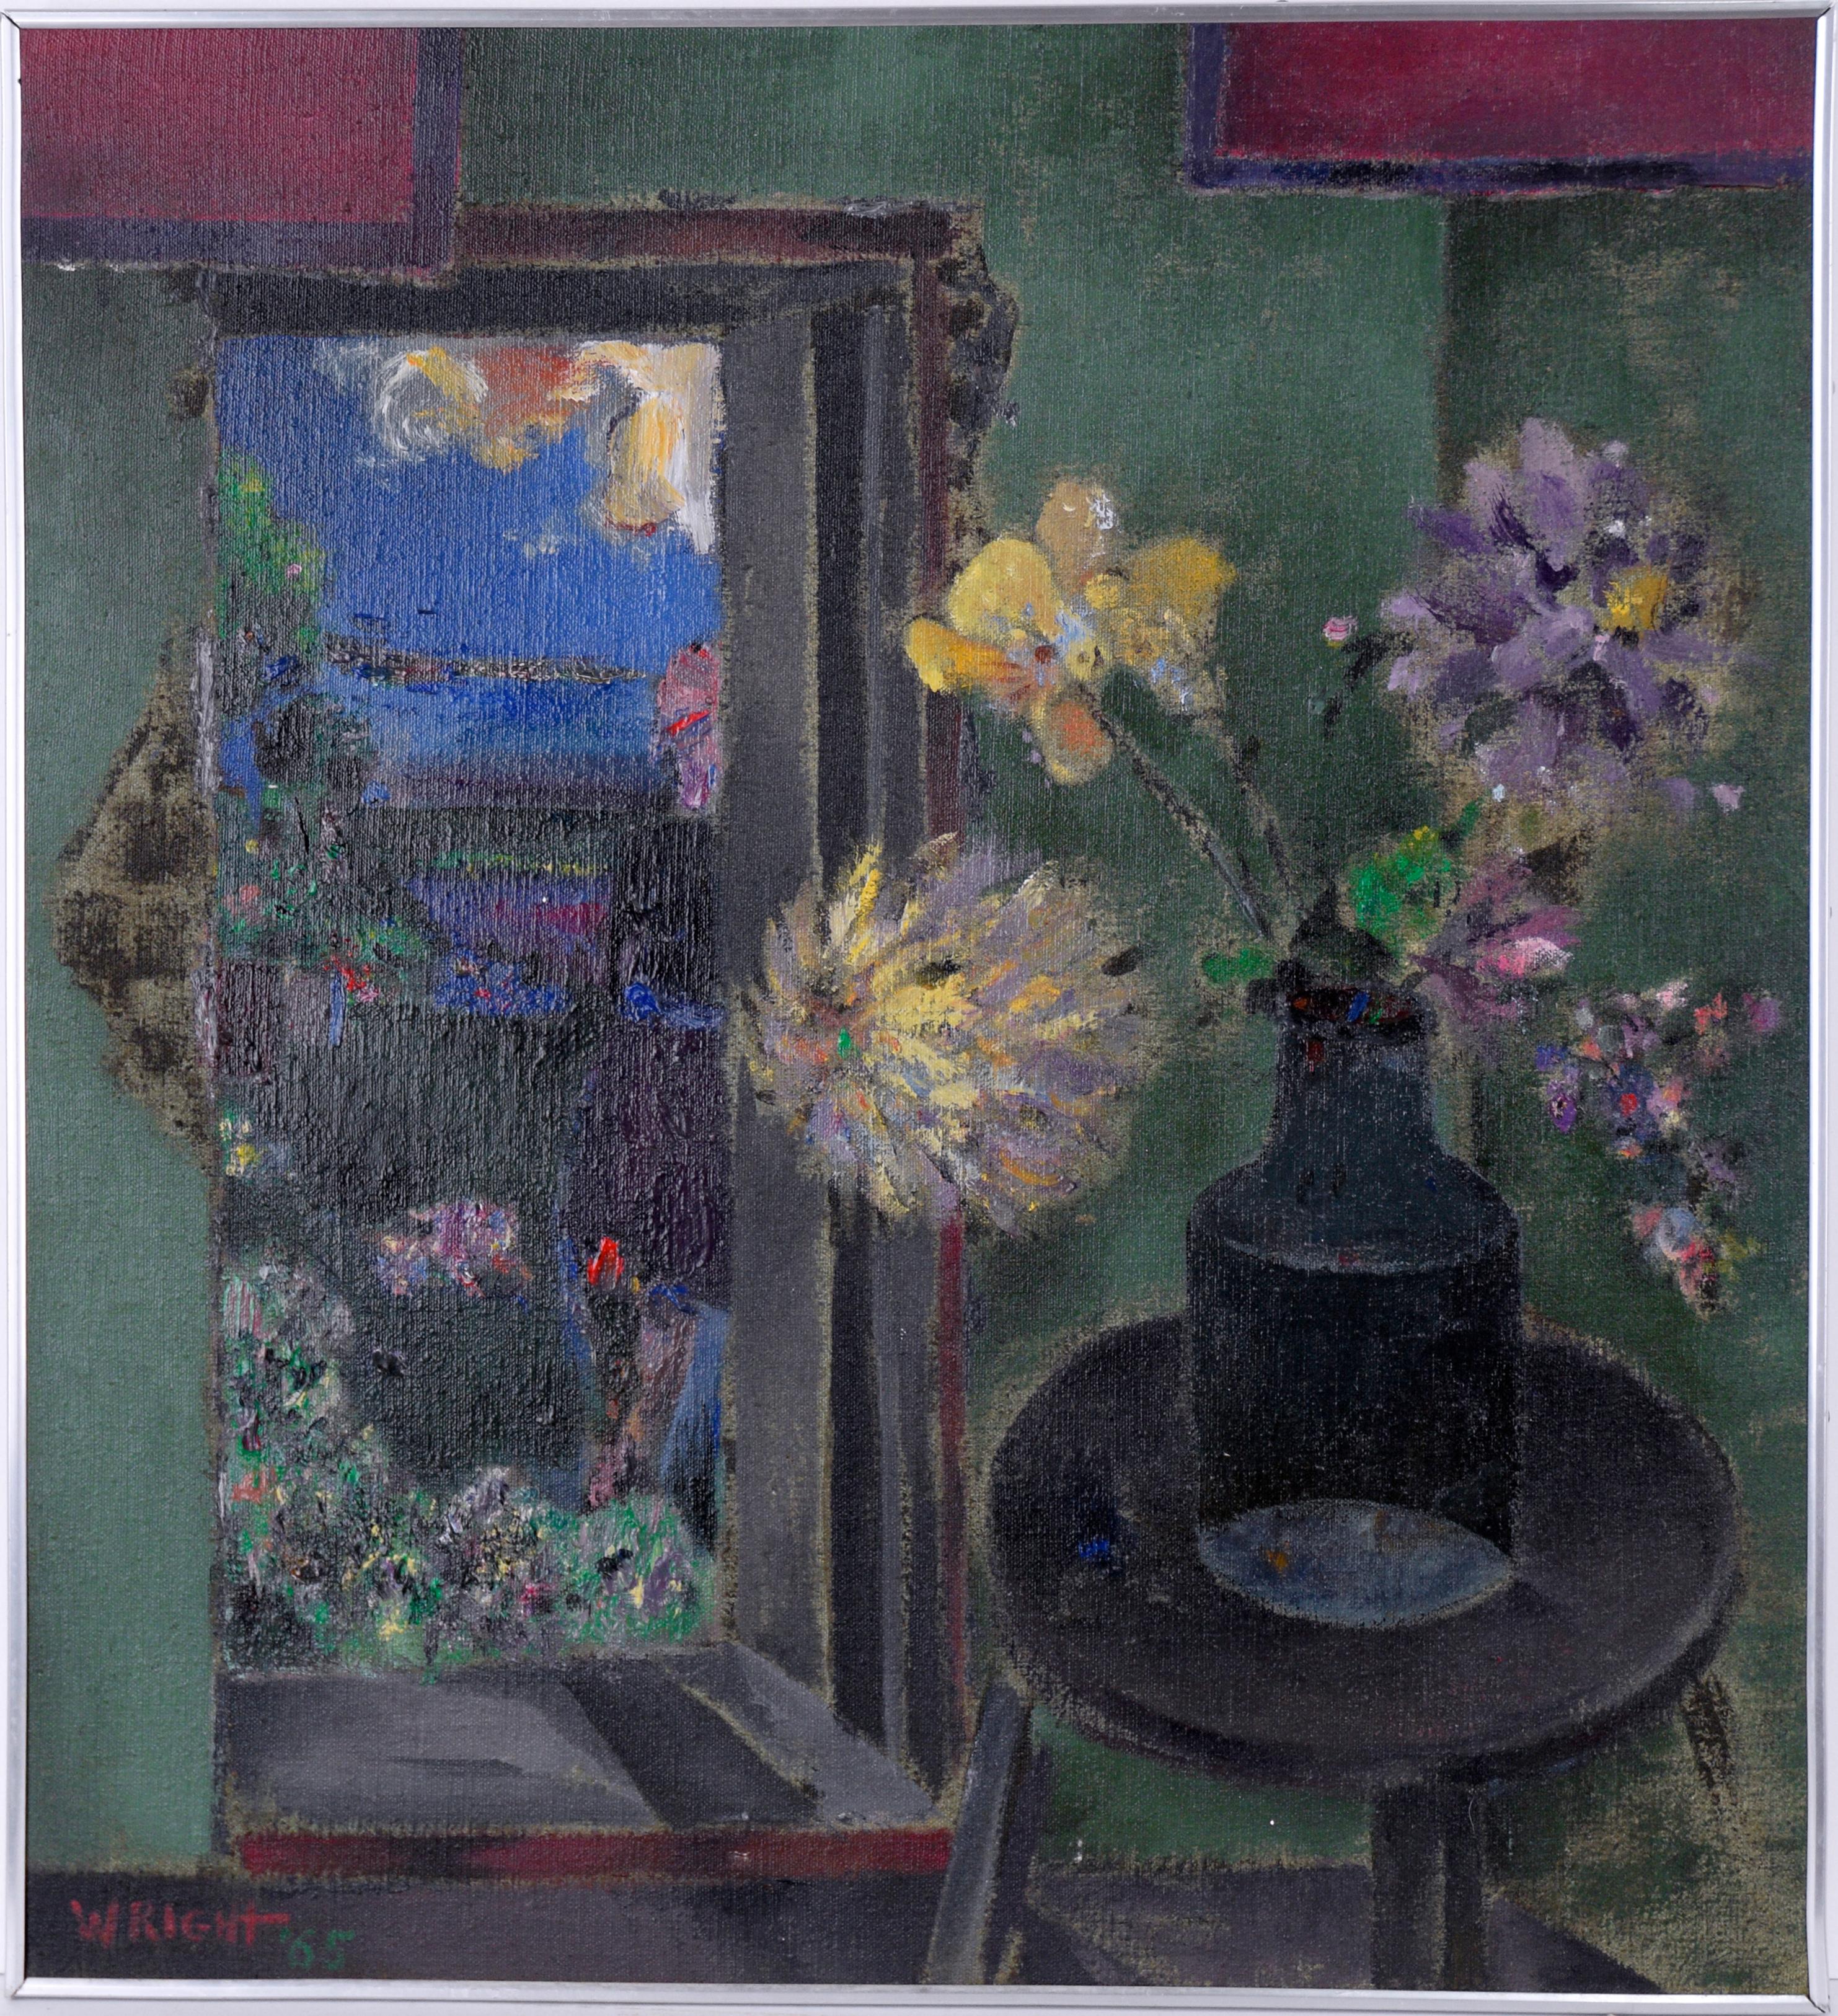 Vase at Dusk - Expressionist Still Life Original Oil Painting by Wright

Brightly colored flowers sit in a vase on a table against hues of dark green giving the feel of darkness creeping in. One yellow chrysanthemum peeks around the window as if